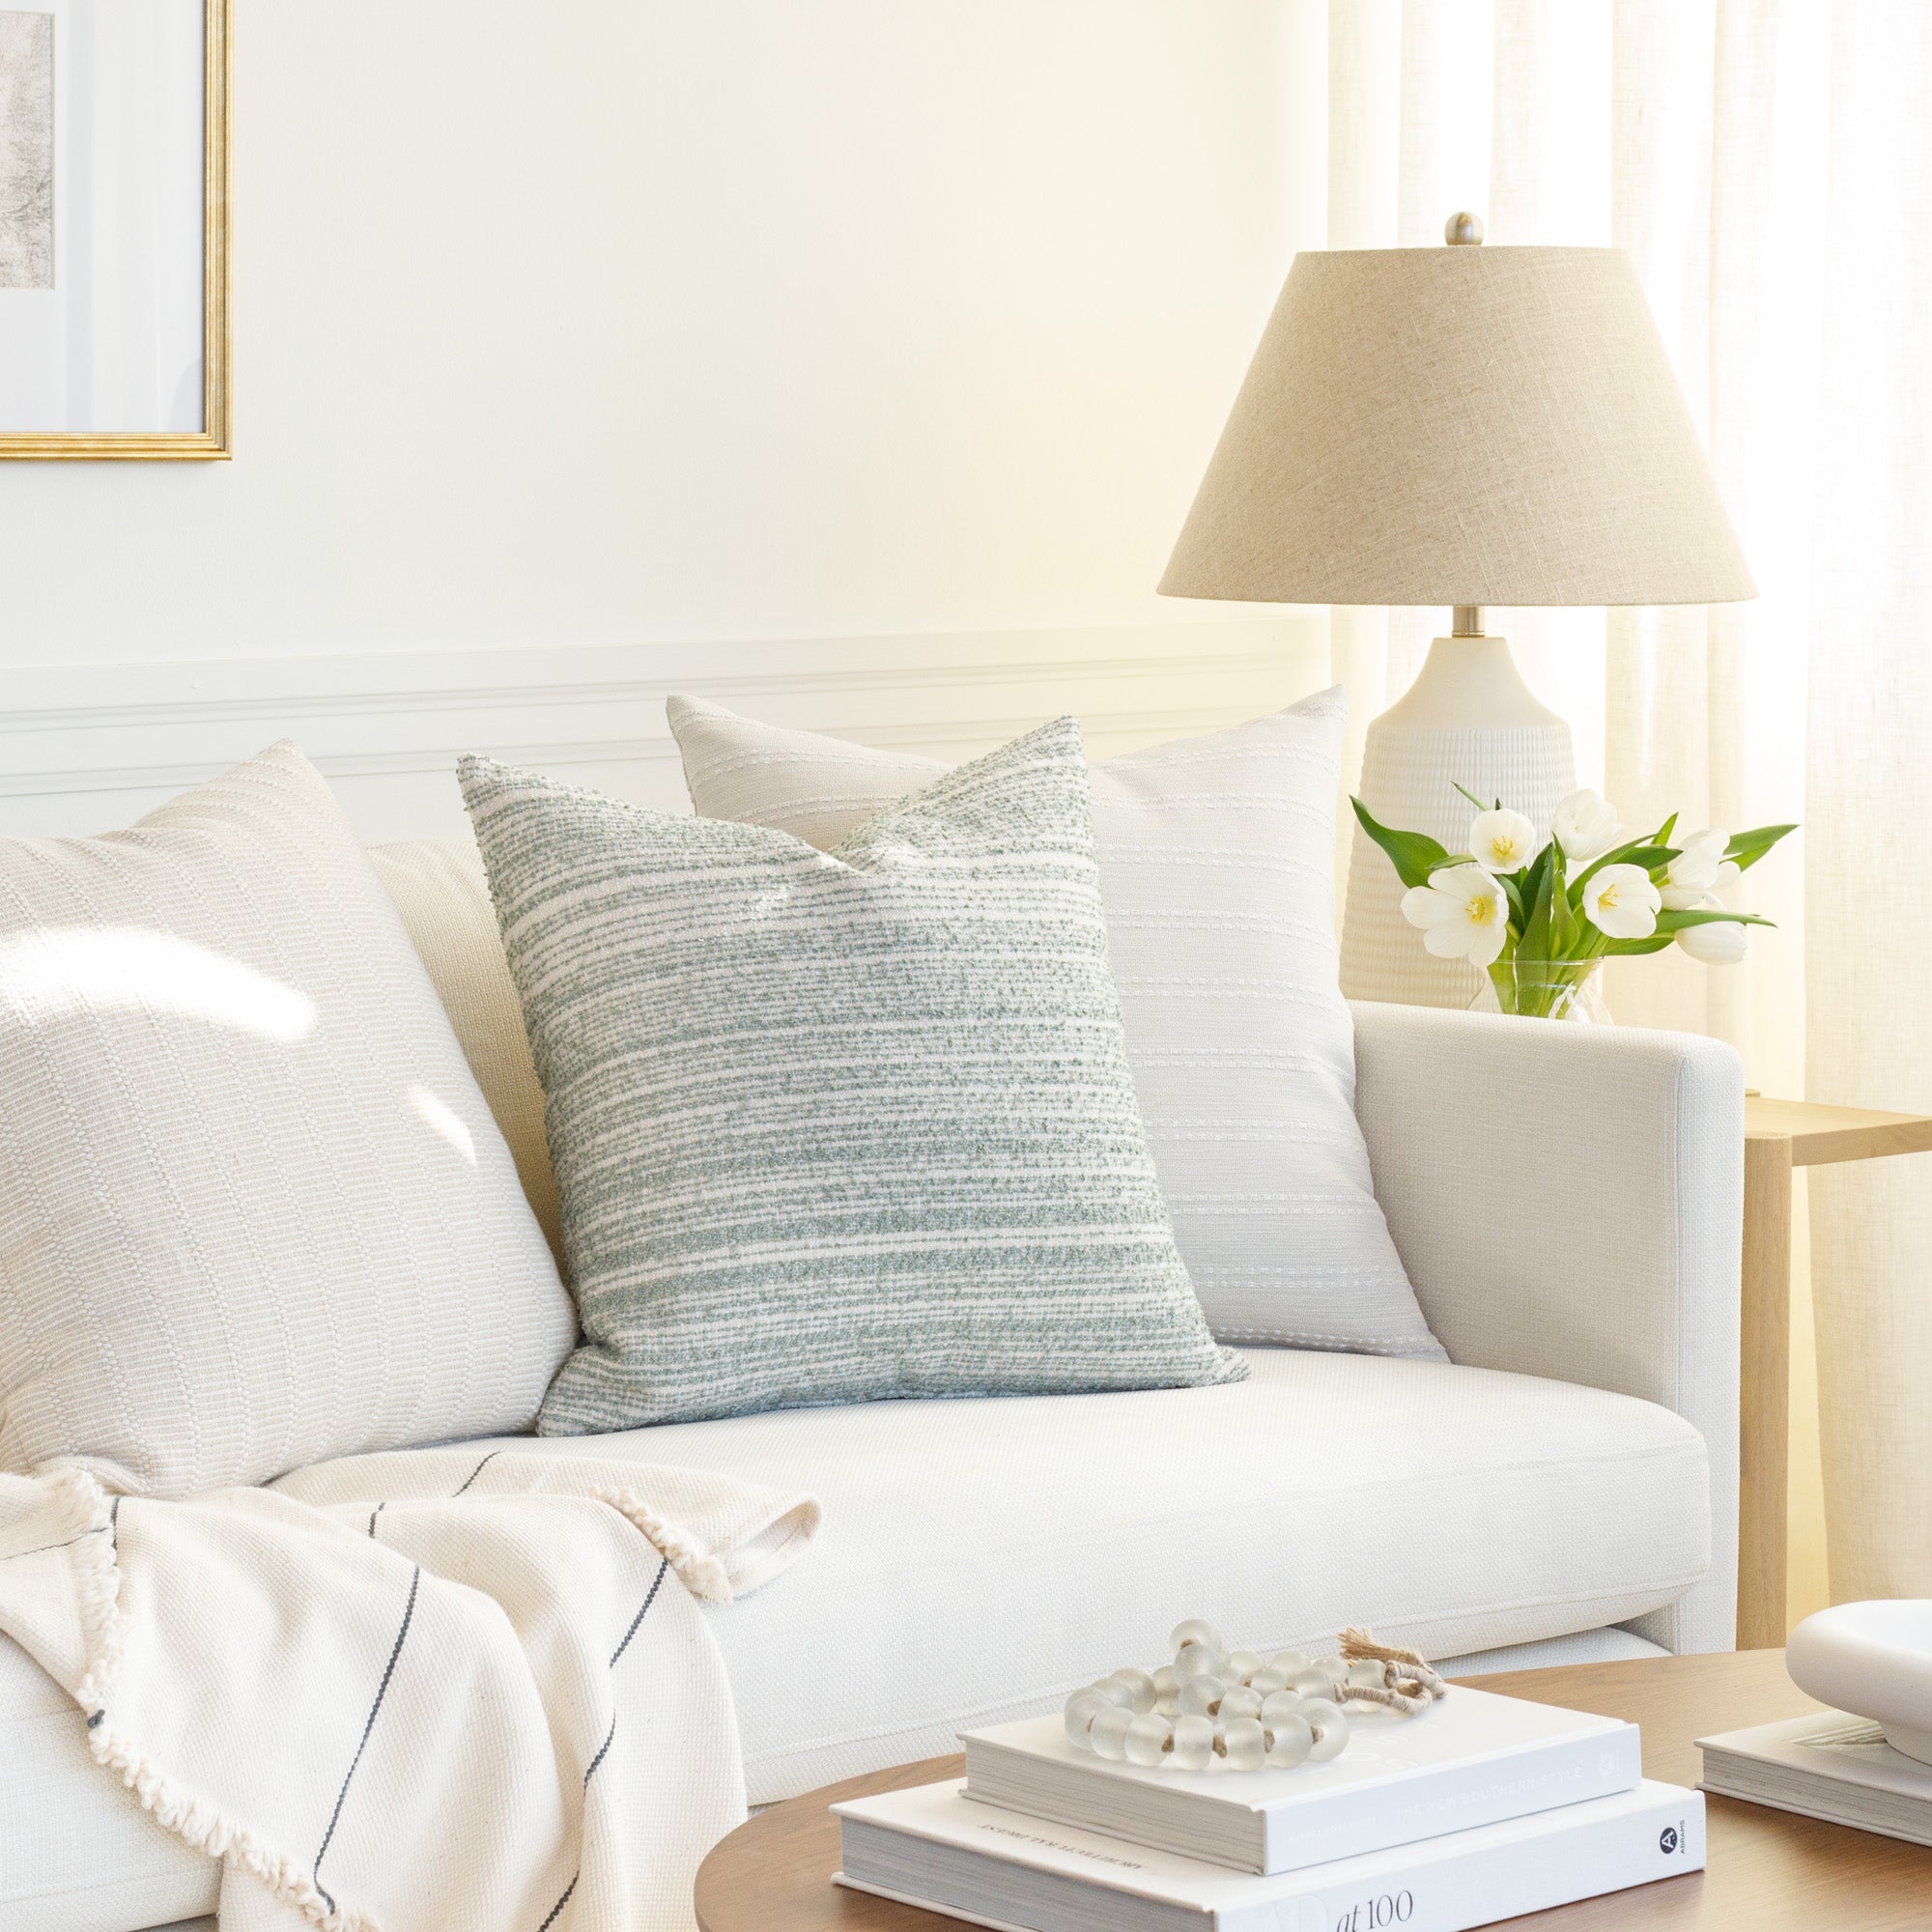 Aqua and soft white throw pillows from Tonic Living